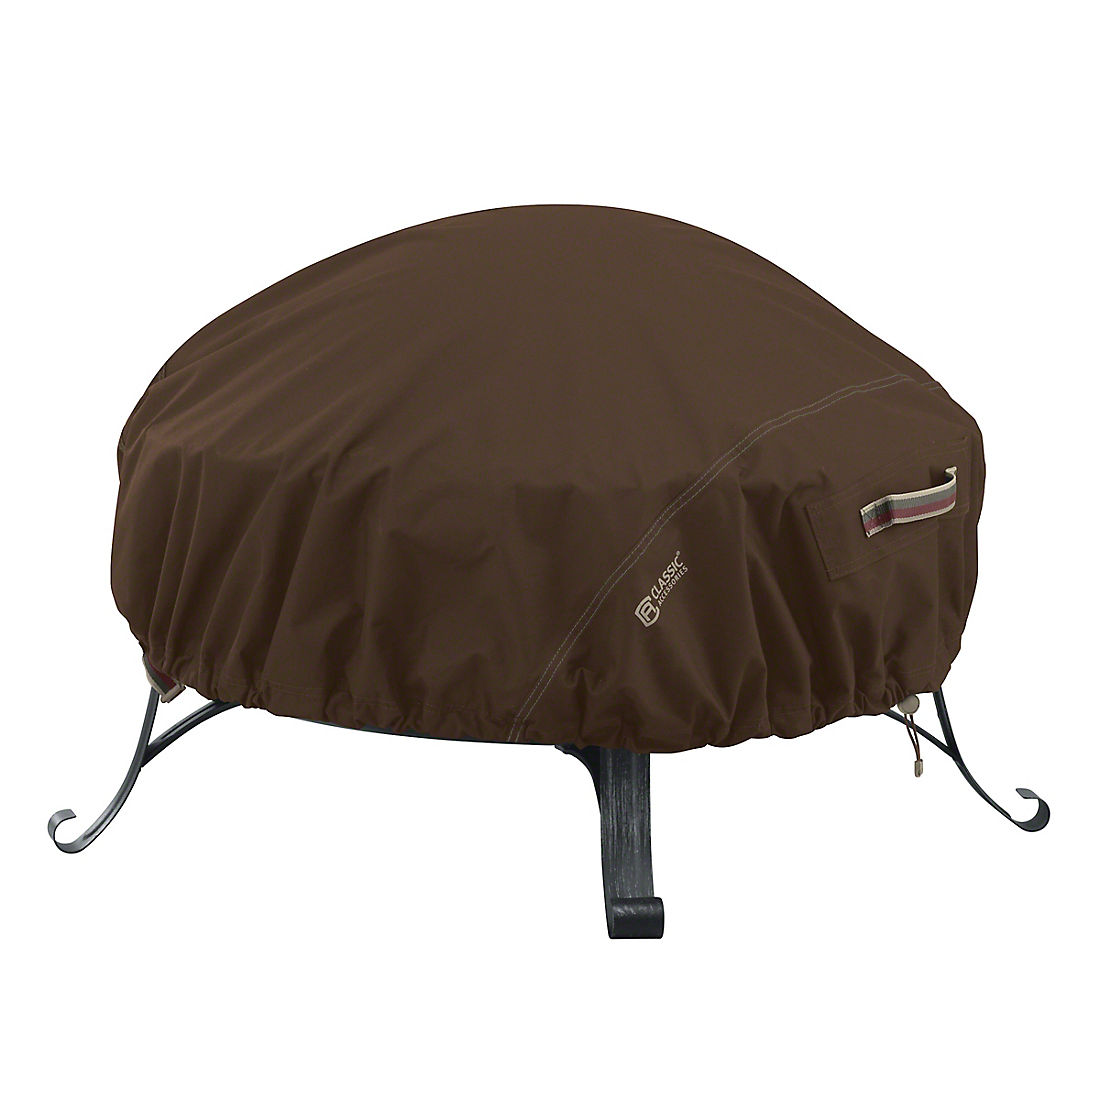 Classic Accessories Madrona 60 Round, Canvas Fire Pit Cover